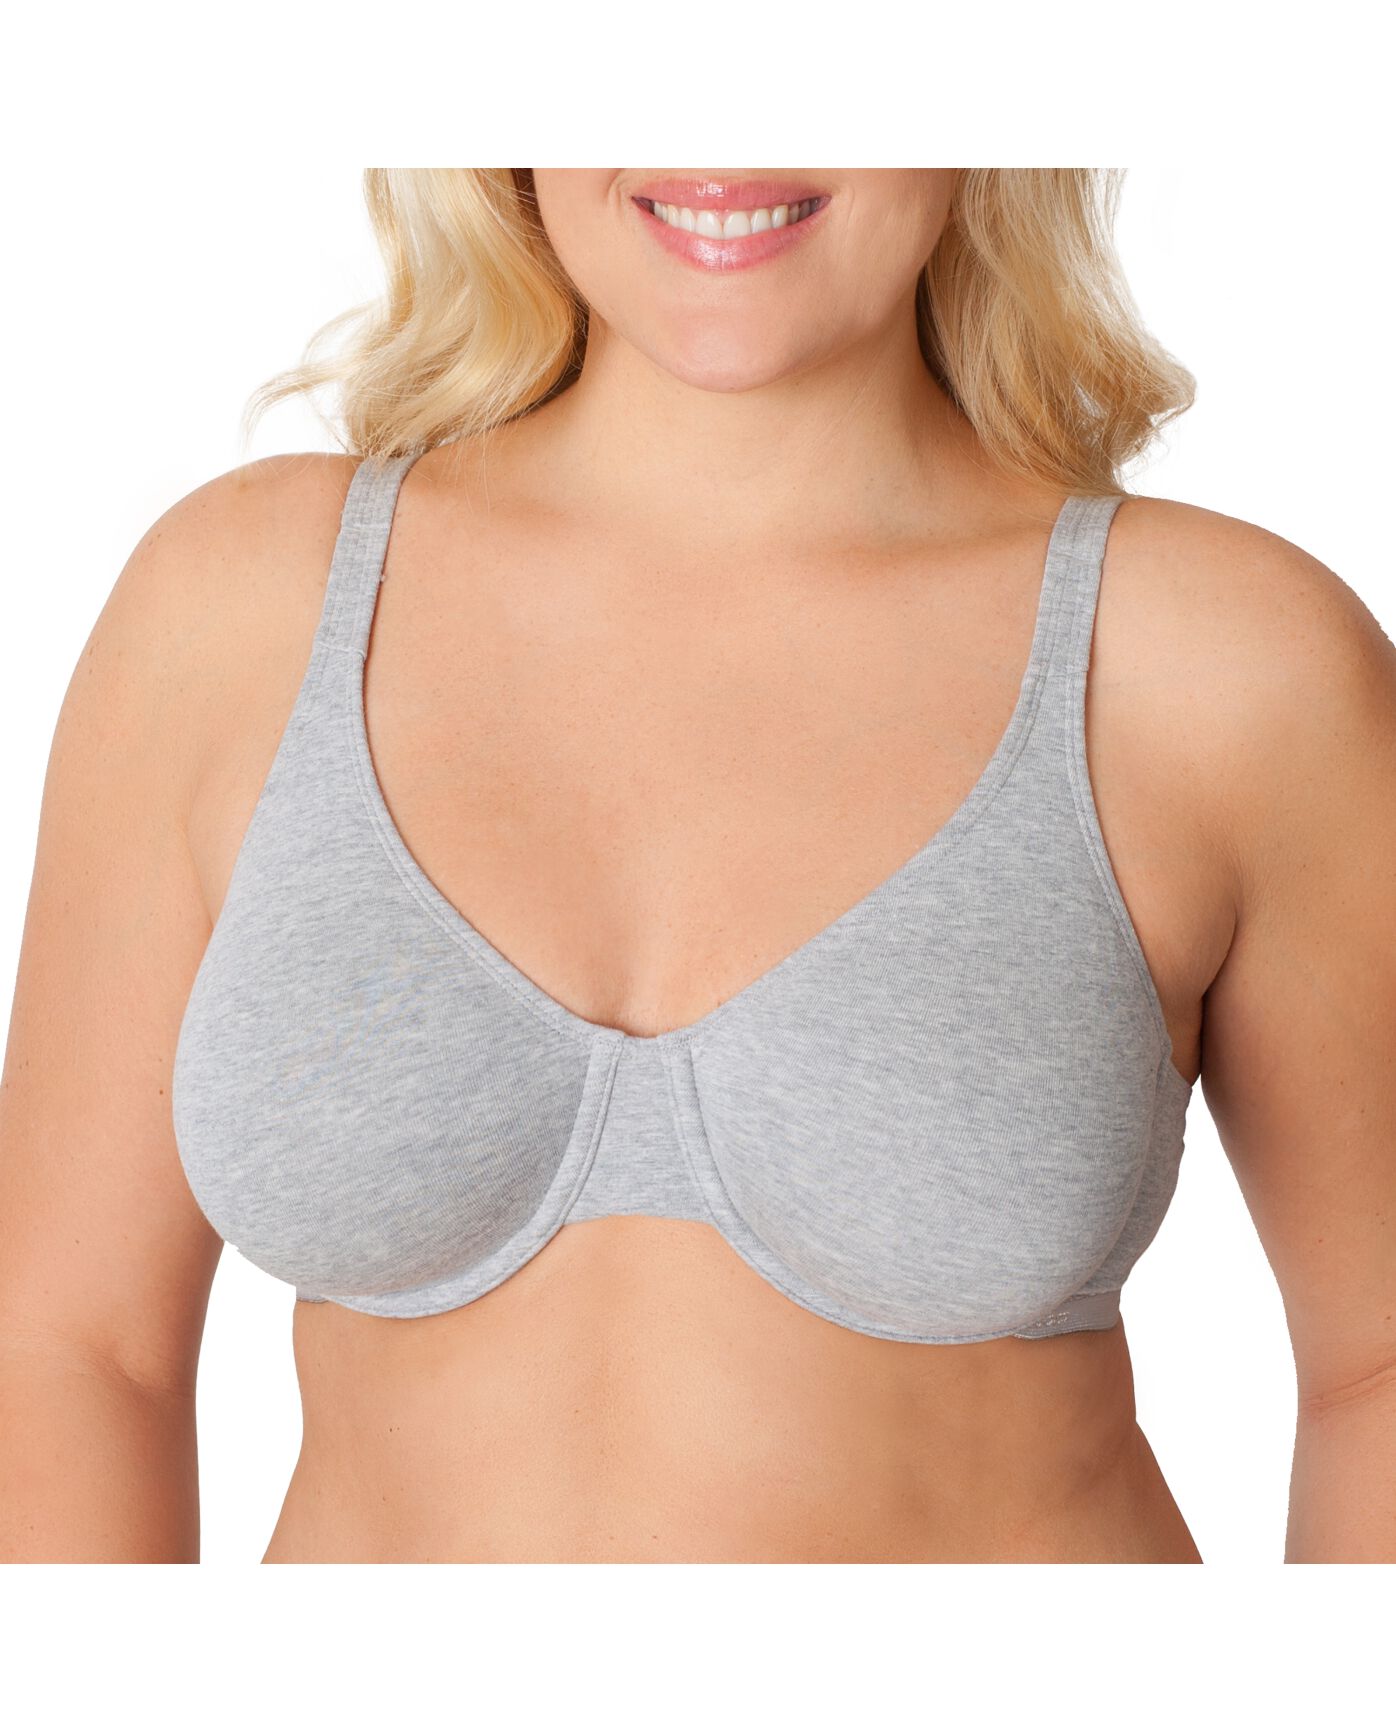 Fruit of The Loom 9292 Extreme Comfort Bra 34B - White for sale online